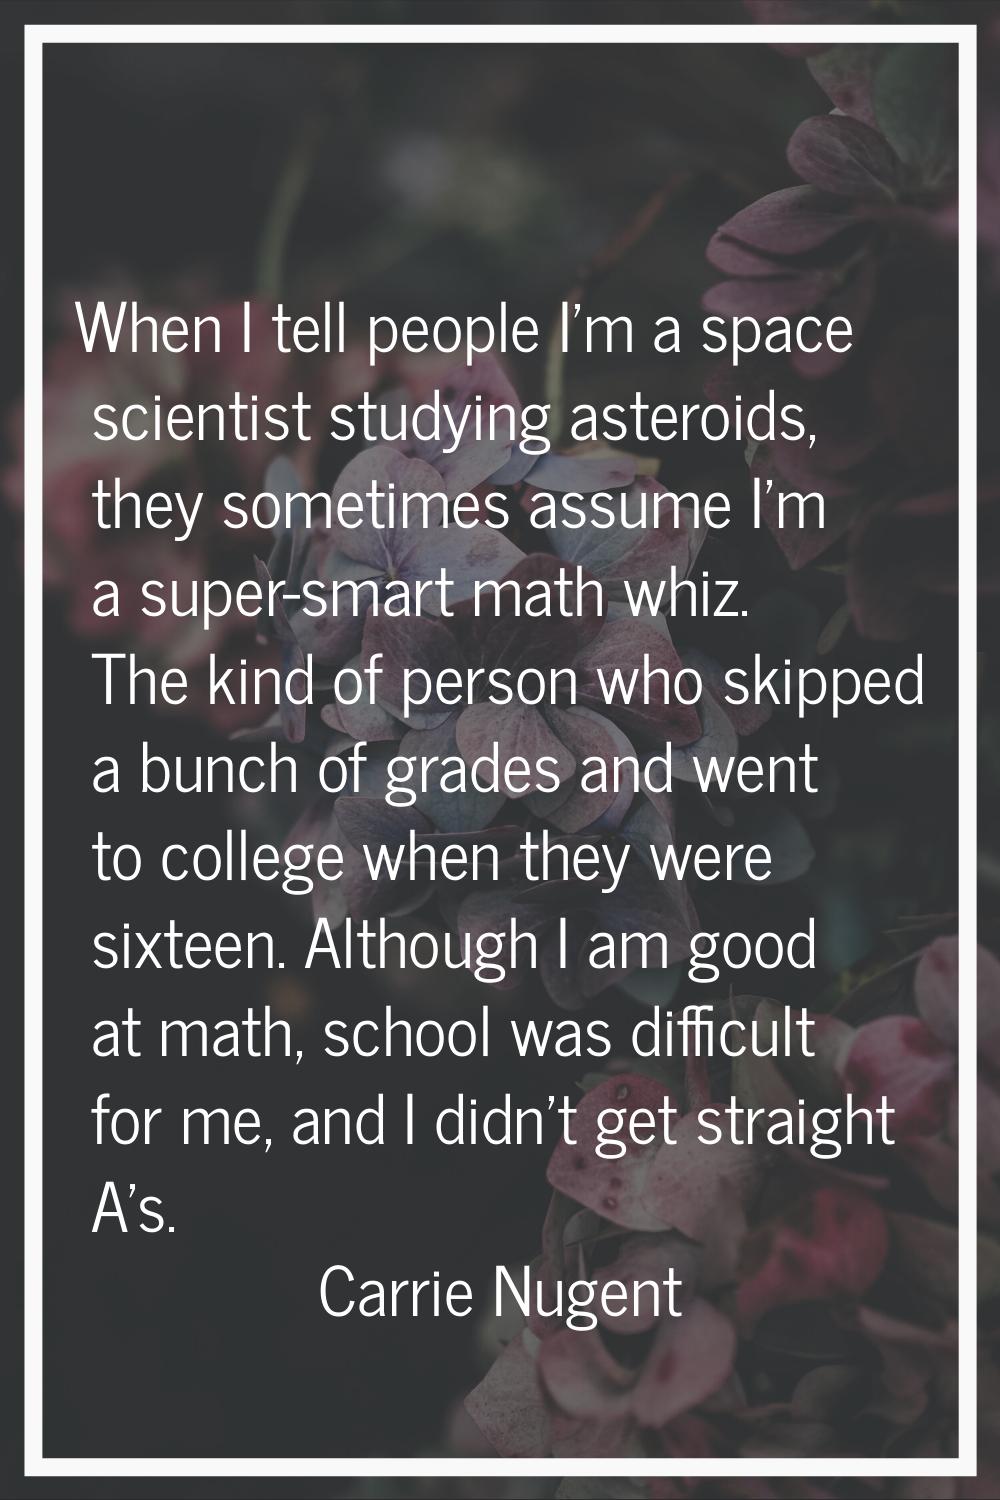 When I tell people I'm a space scientist studying asteroids, they sometimes assume I'm a super-smar